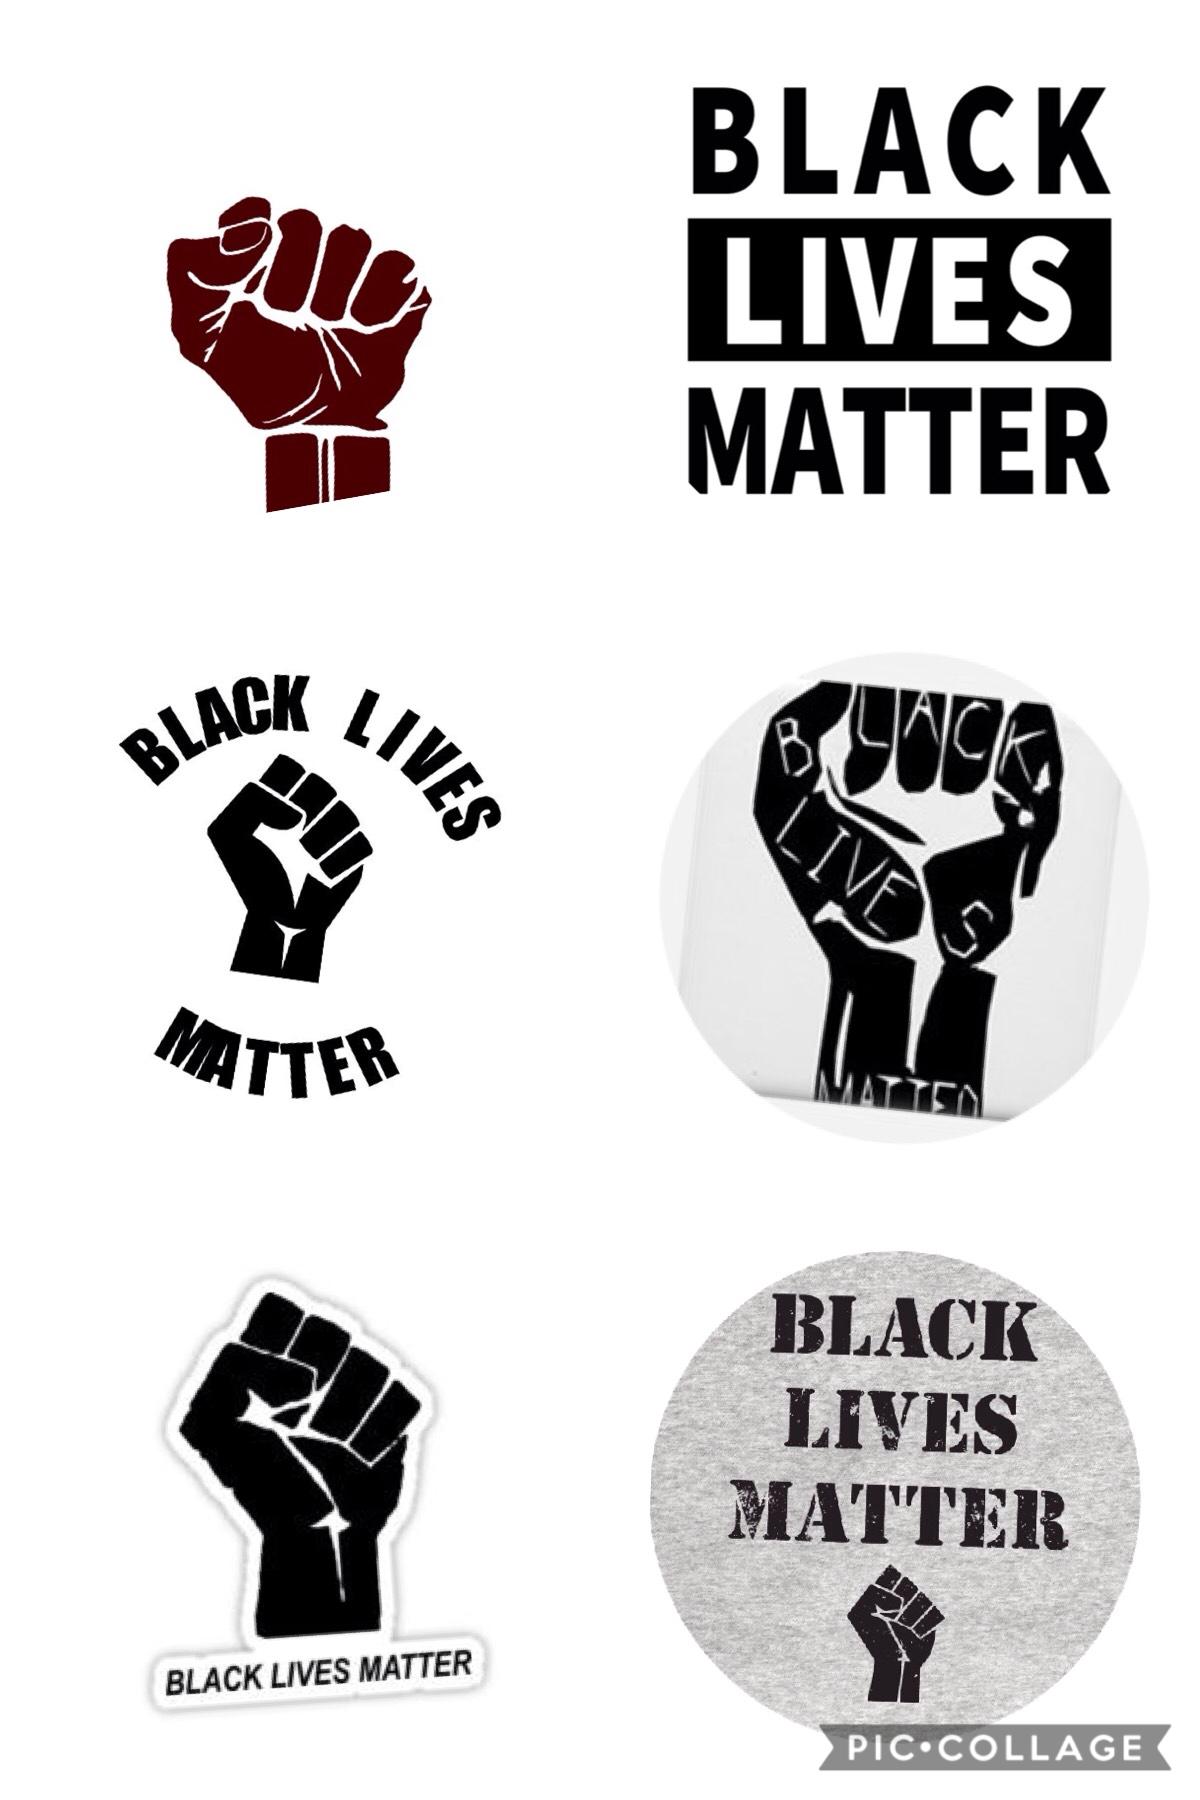 -TaP-

Free black lives matrer icon pack!
Hope u like them if used plz give credit to Ocean-Tides
Thx
-Emily